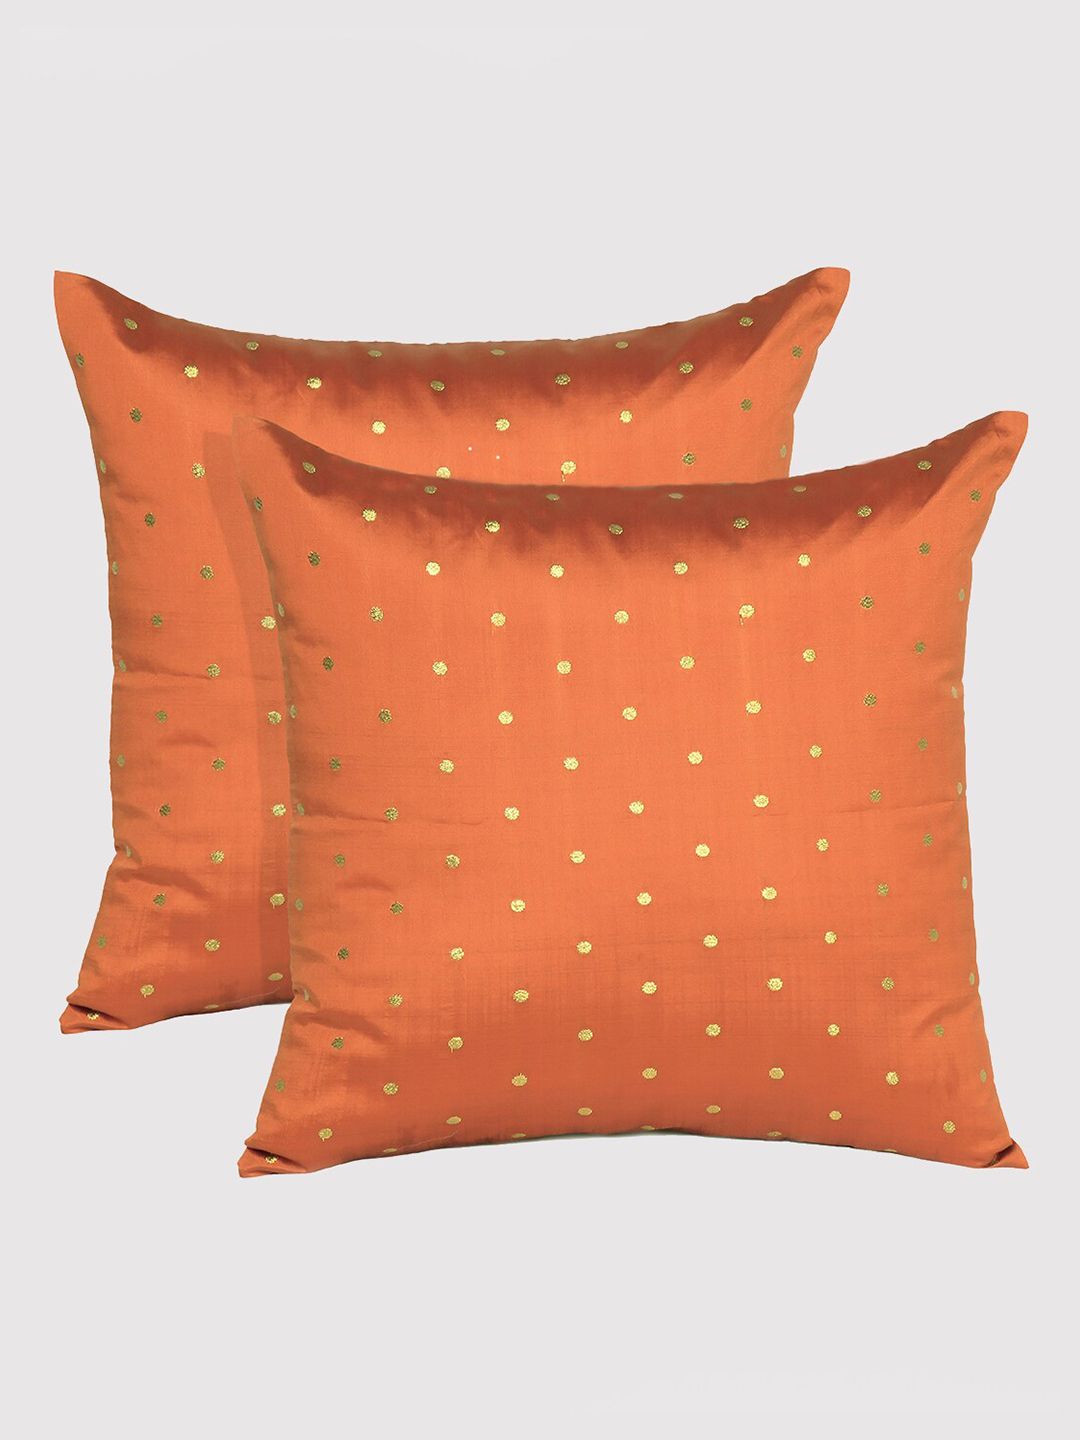 OUSSUM Orange & Gold-Toned Set of 2 Geometric Square Cushion Covers Price in India